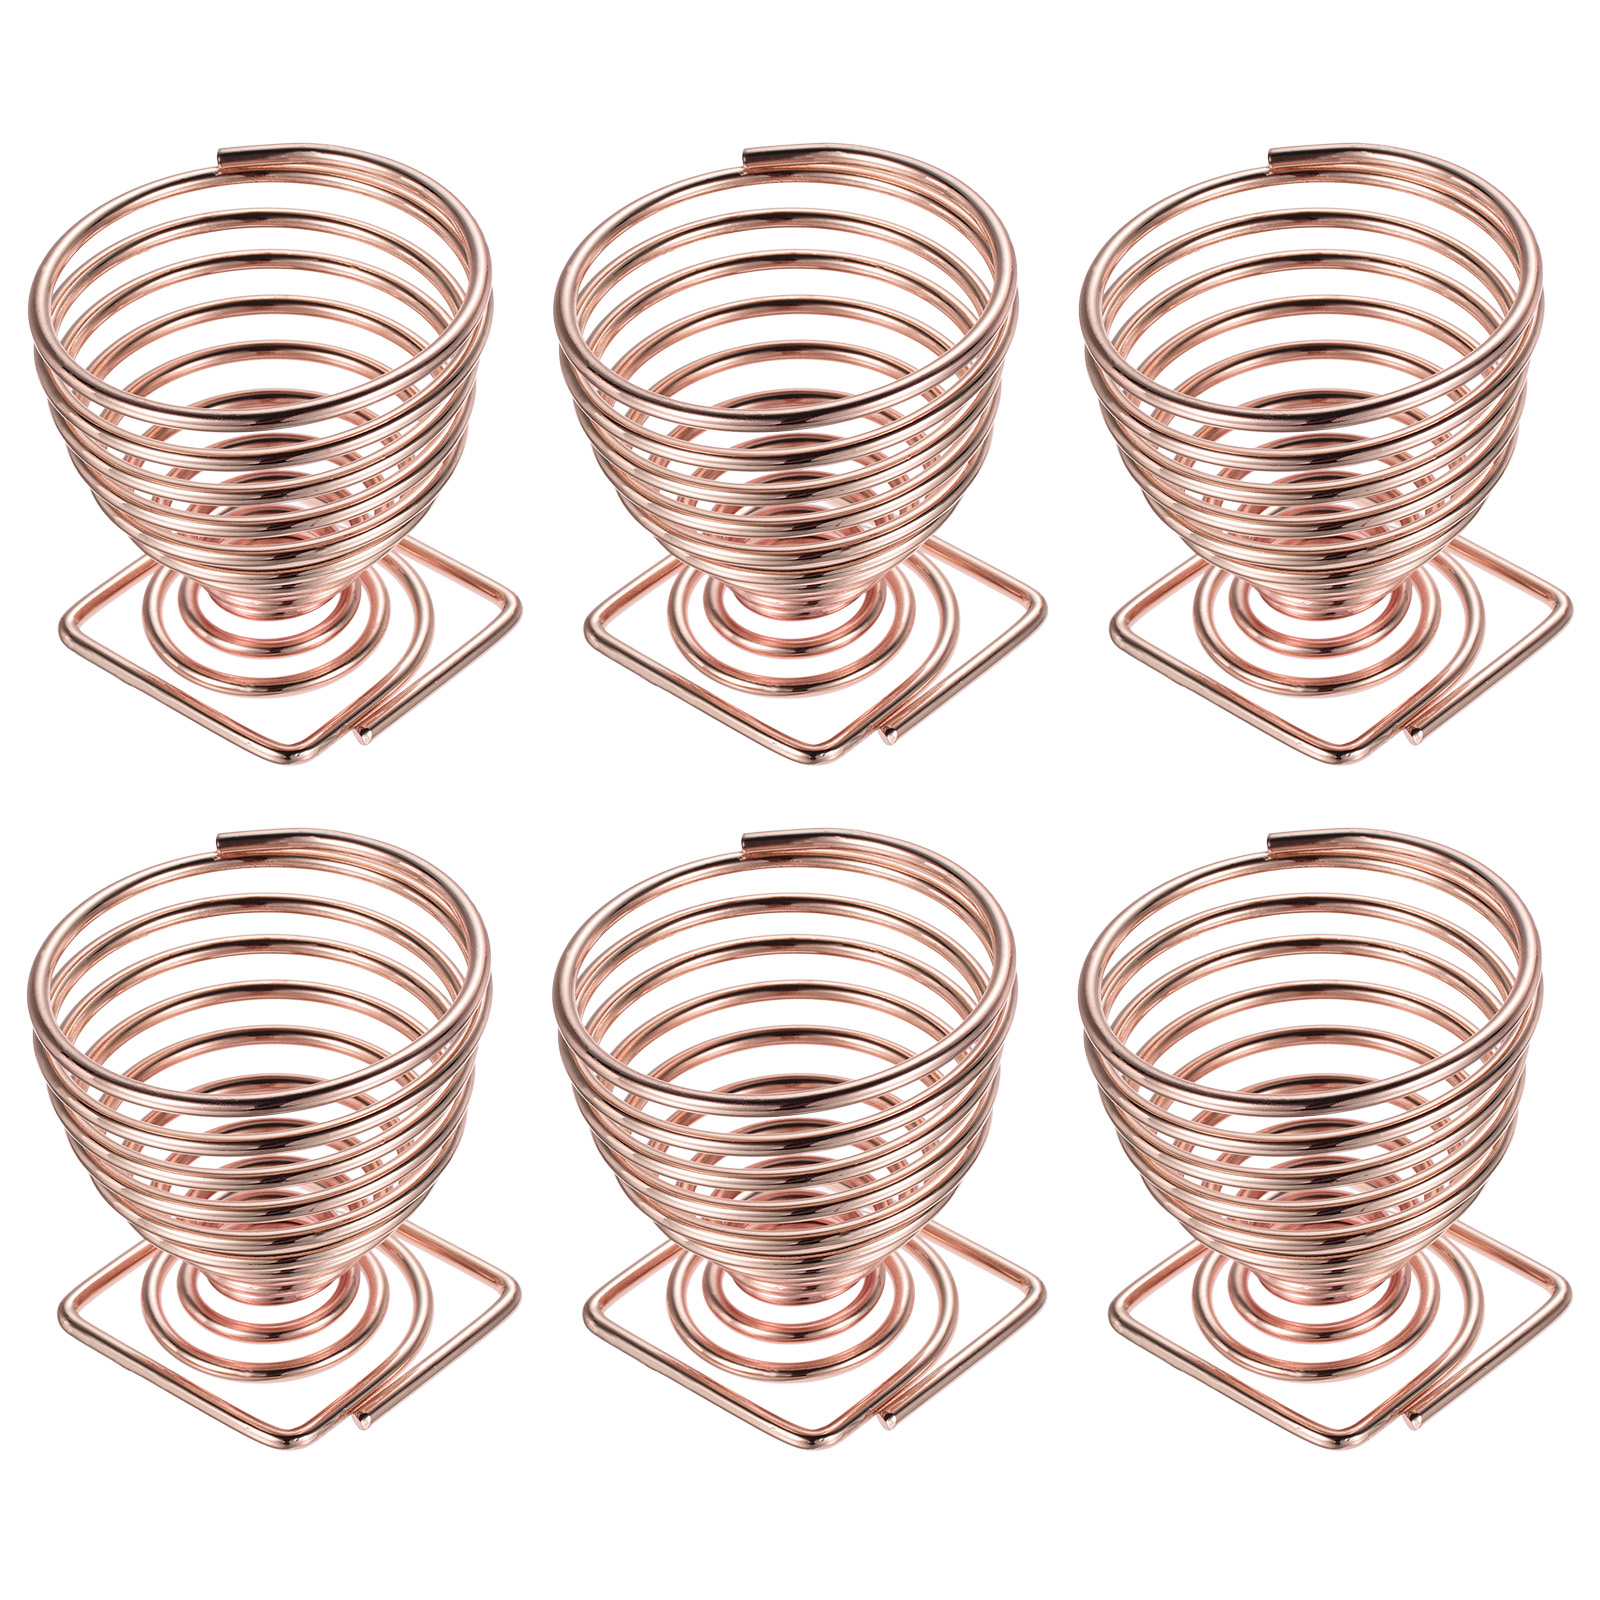 Uxcell 1.7" x 1.7" x 2" Air Plant Holder, 6 Pack Plant Stand Rack Pot Containers for Home Wedding, Rose Gold - image 1 of 6